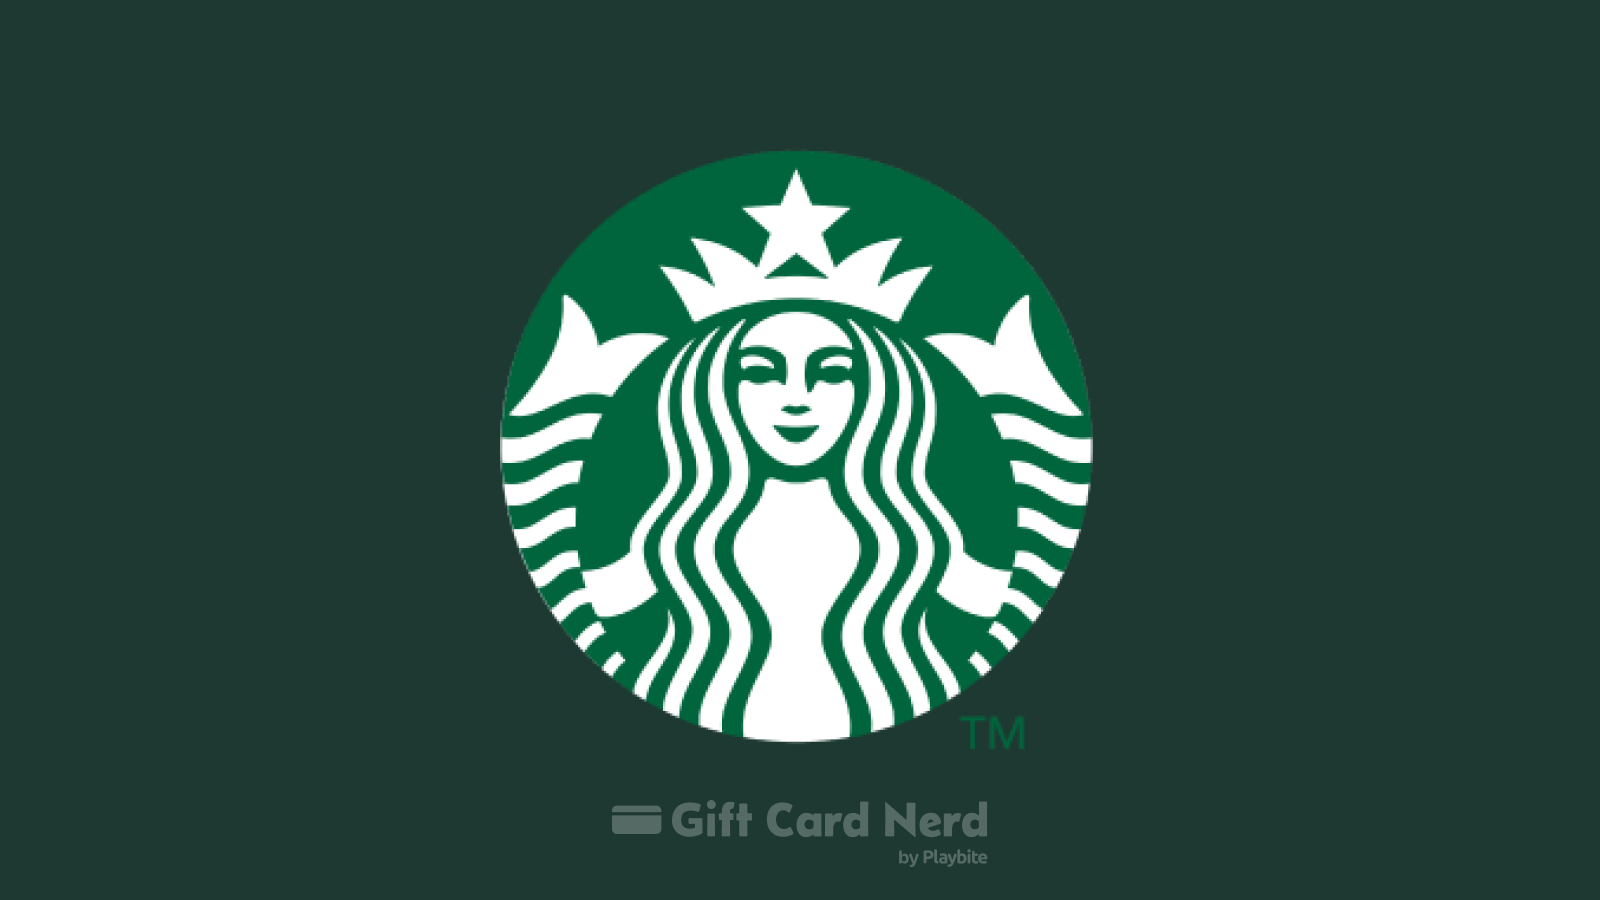 Can I Use a Starbucks Gift Card on Venmo?